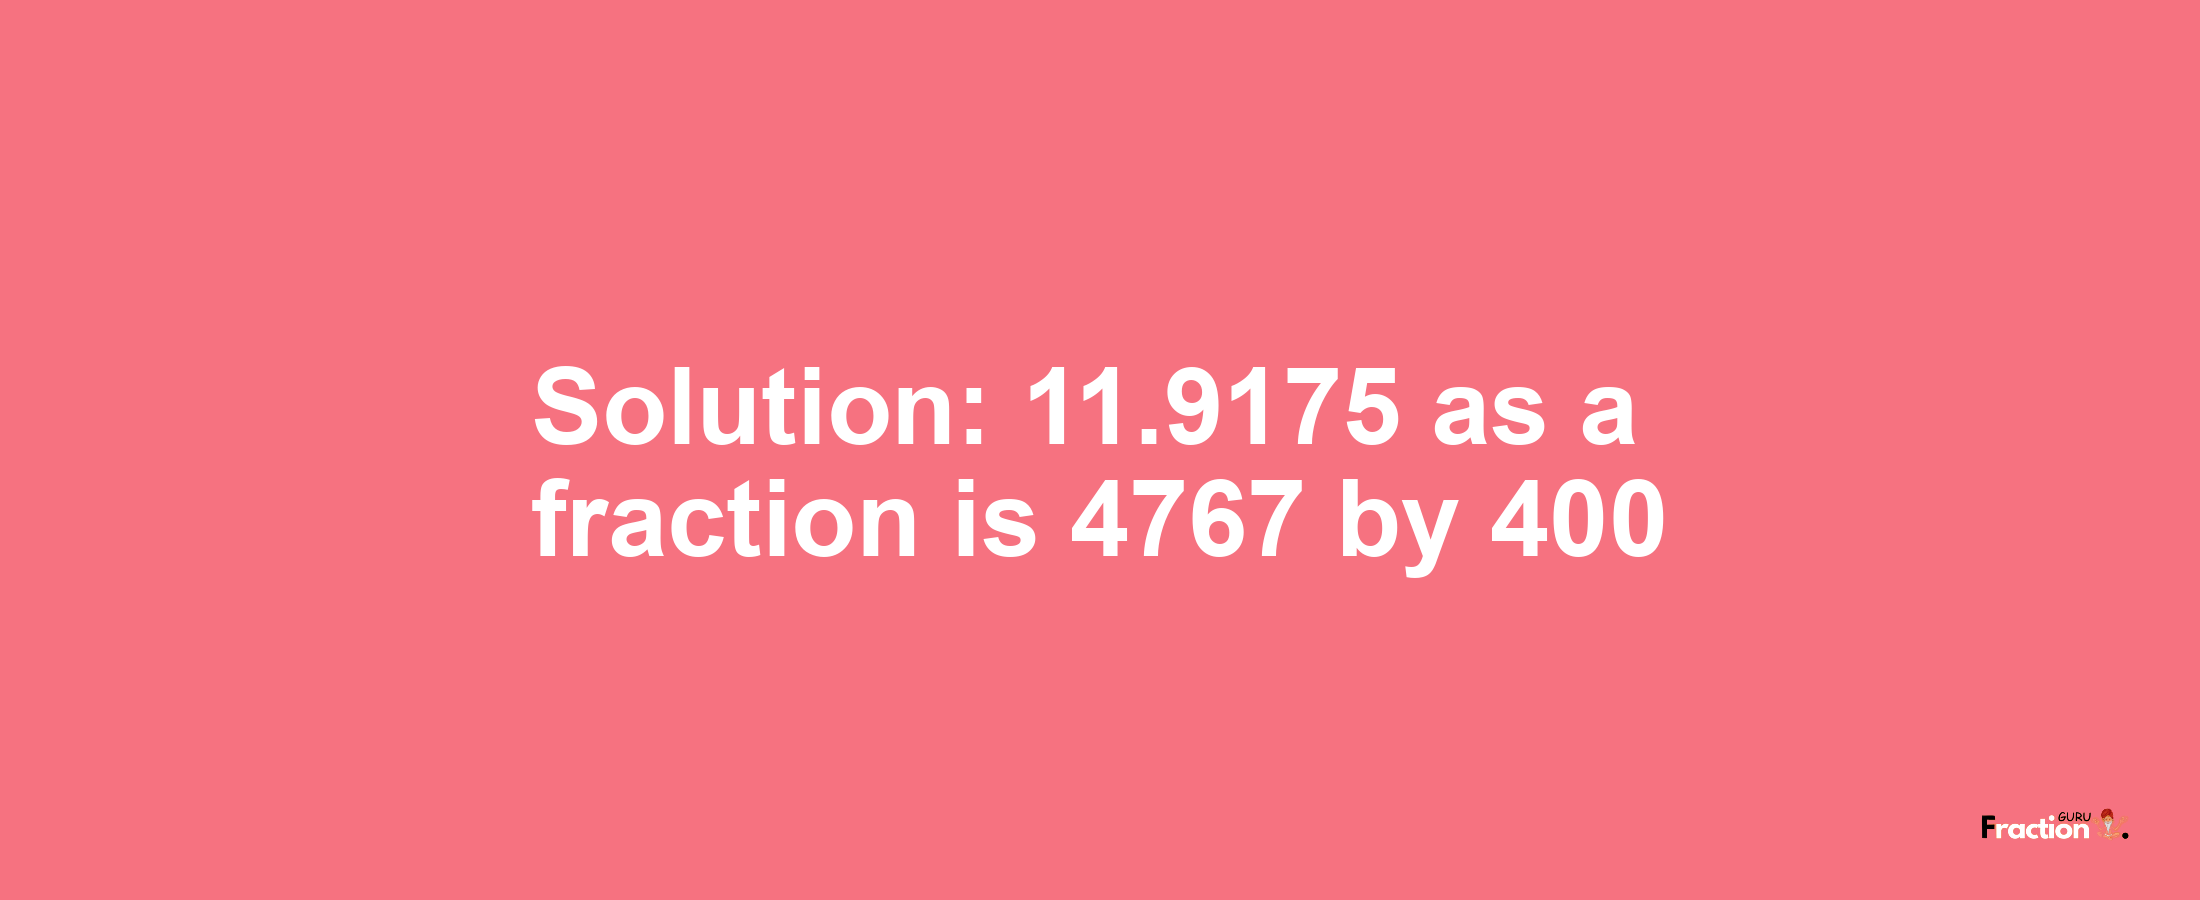 Solution:11.9175 as a fraction is 4767/400